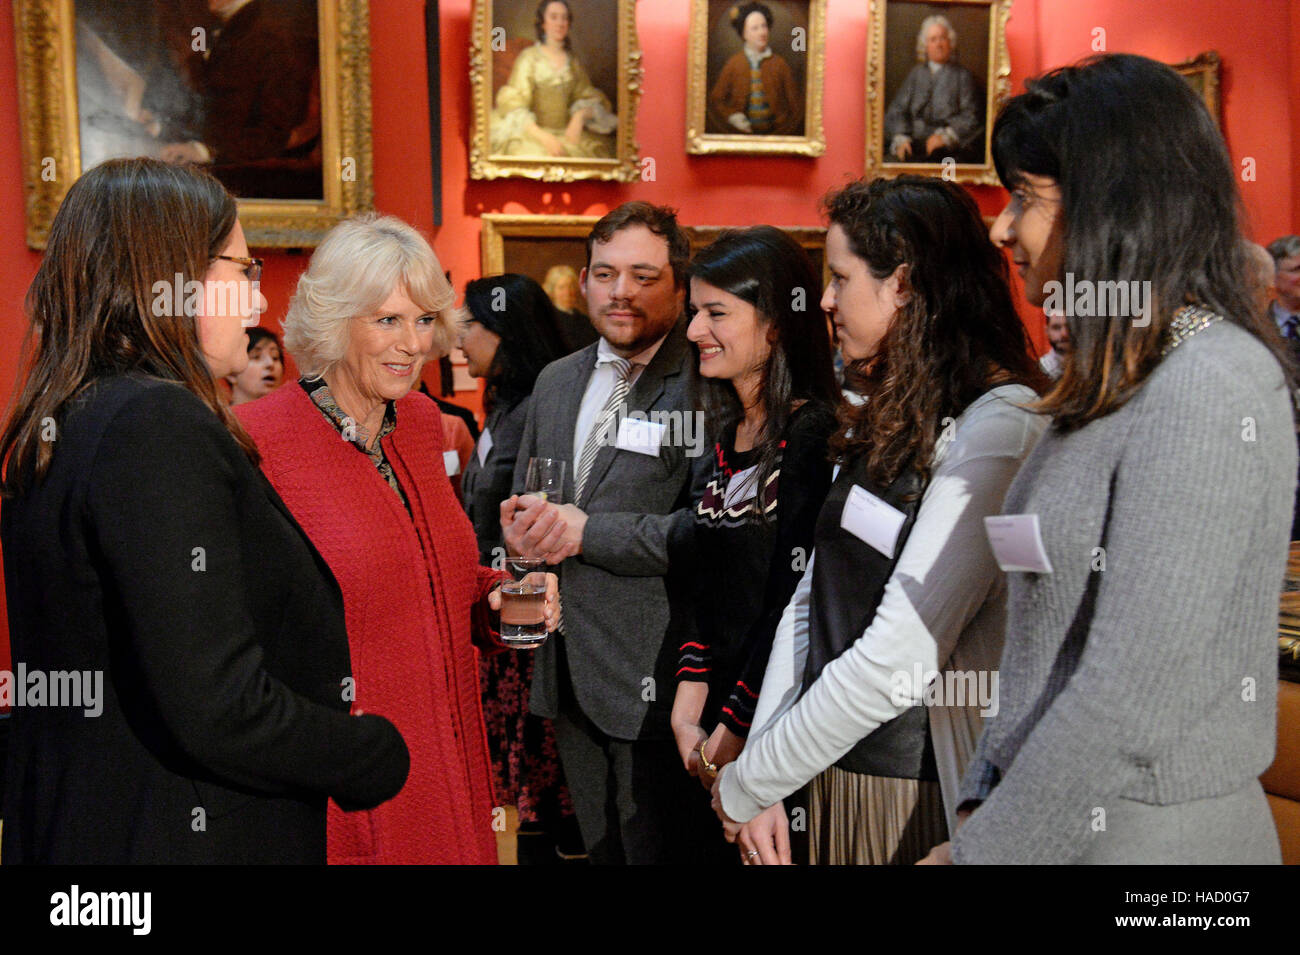 The Duchess of Cambridge meets students during her visit to the University of Cambridge's Fitzwilliam Museum to mark its bicentenary and to celebrate the 600th anniversary of the Cambridge University Library. Stock Photo